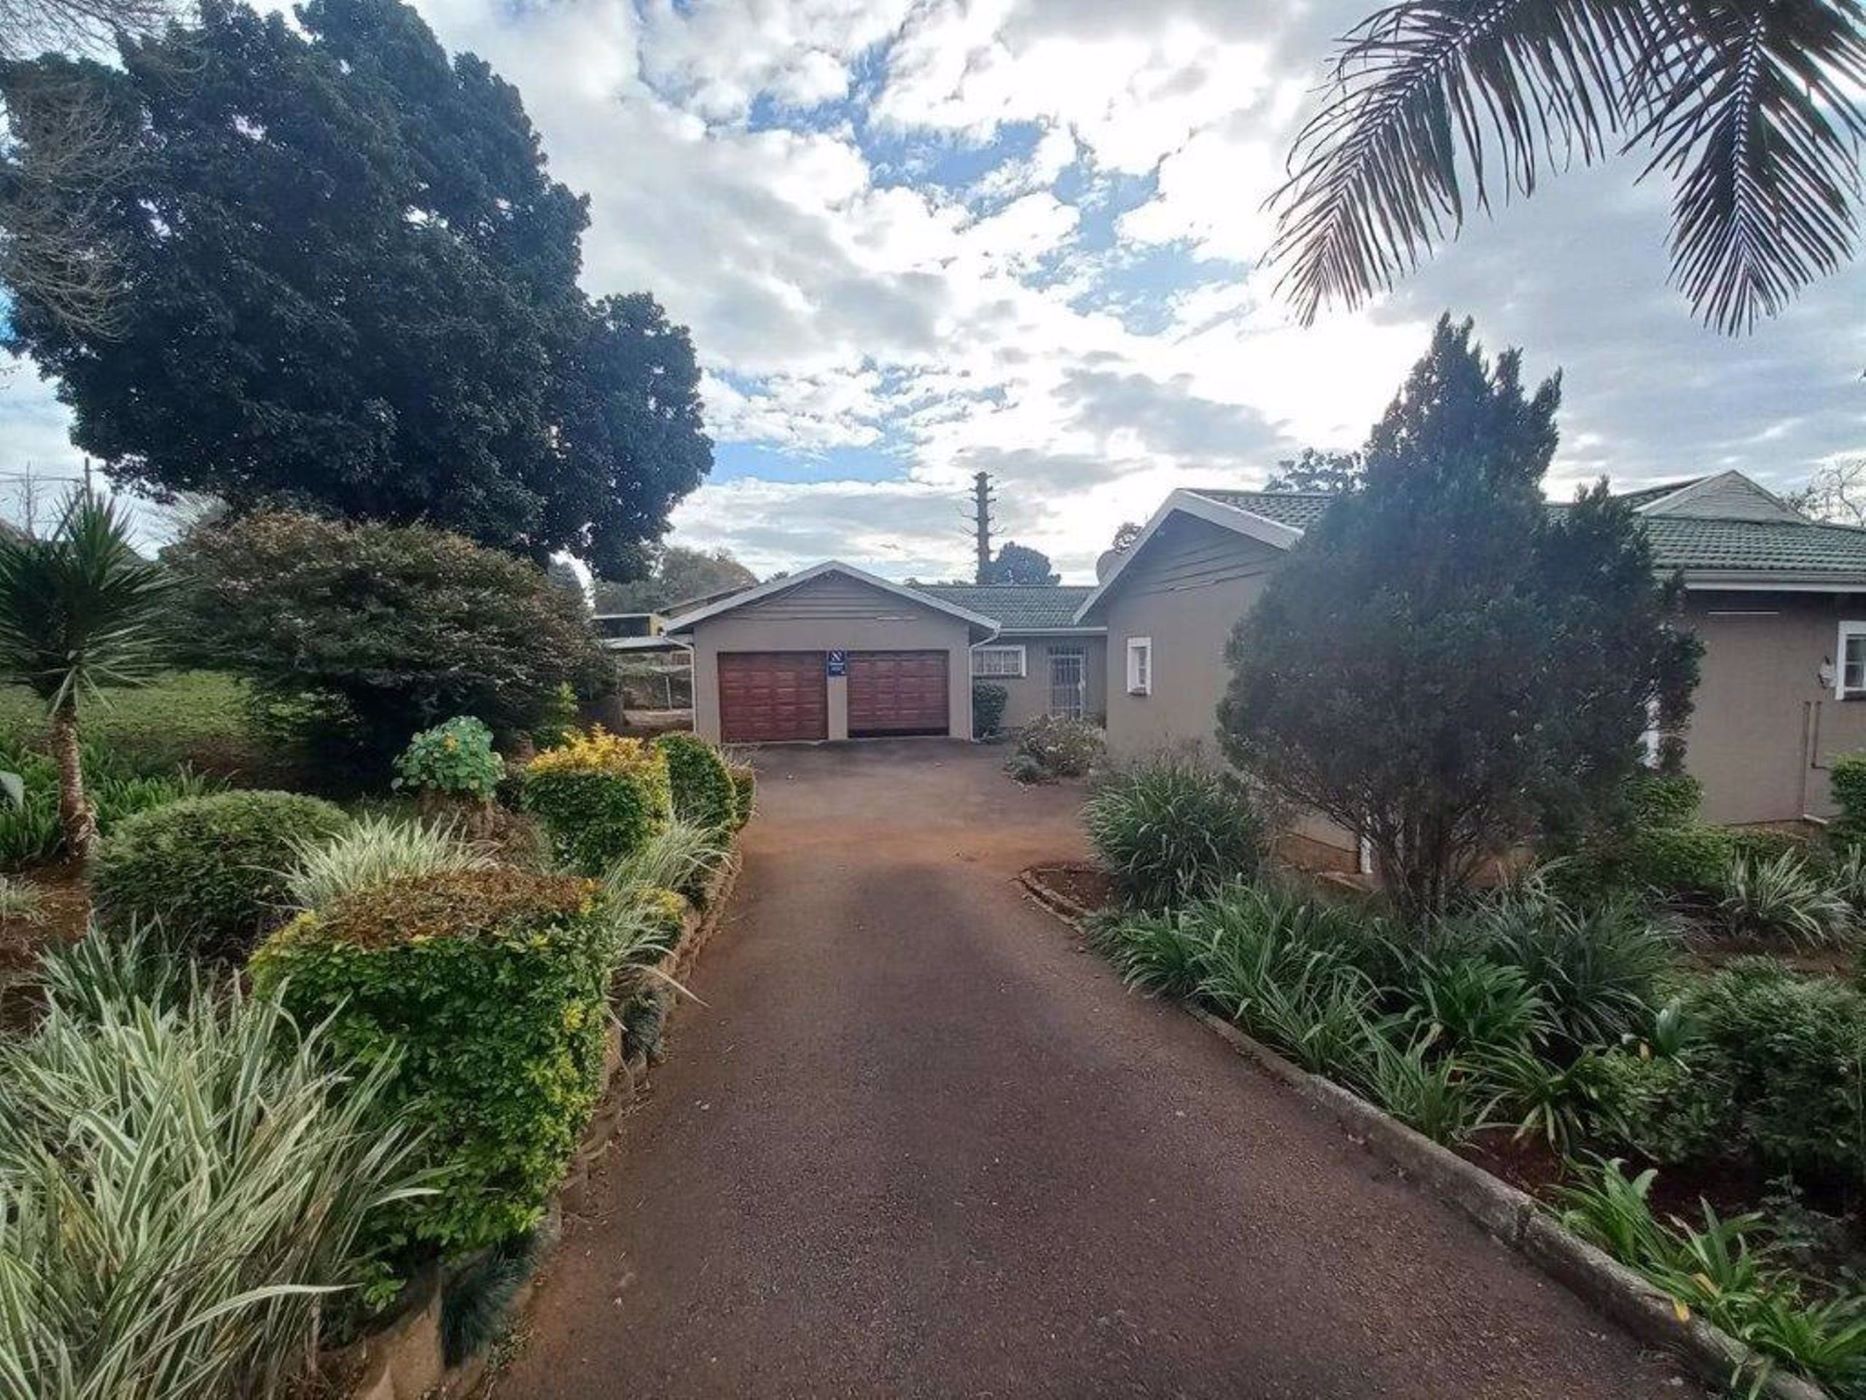 4 bedroom house for sale in Howick